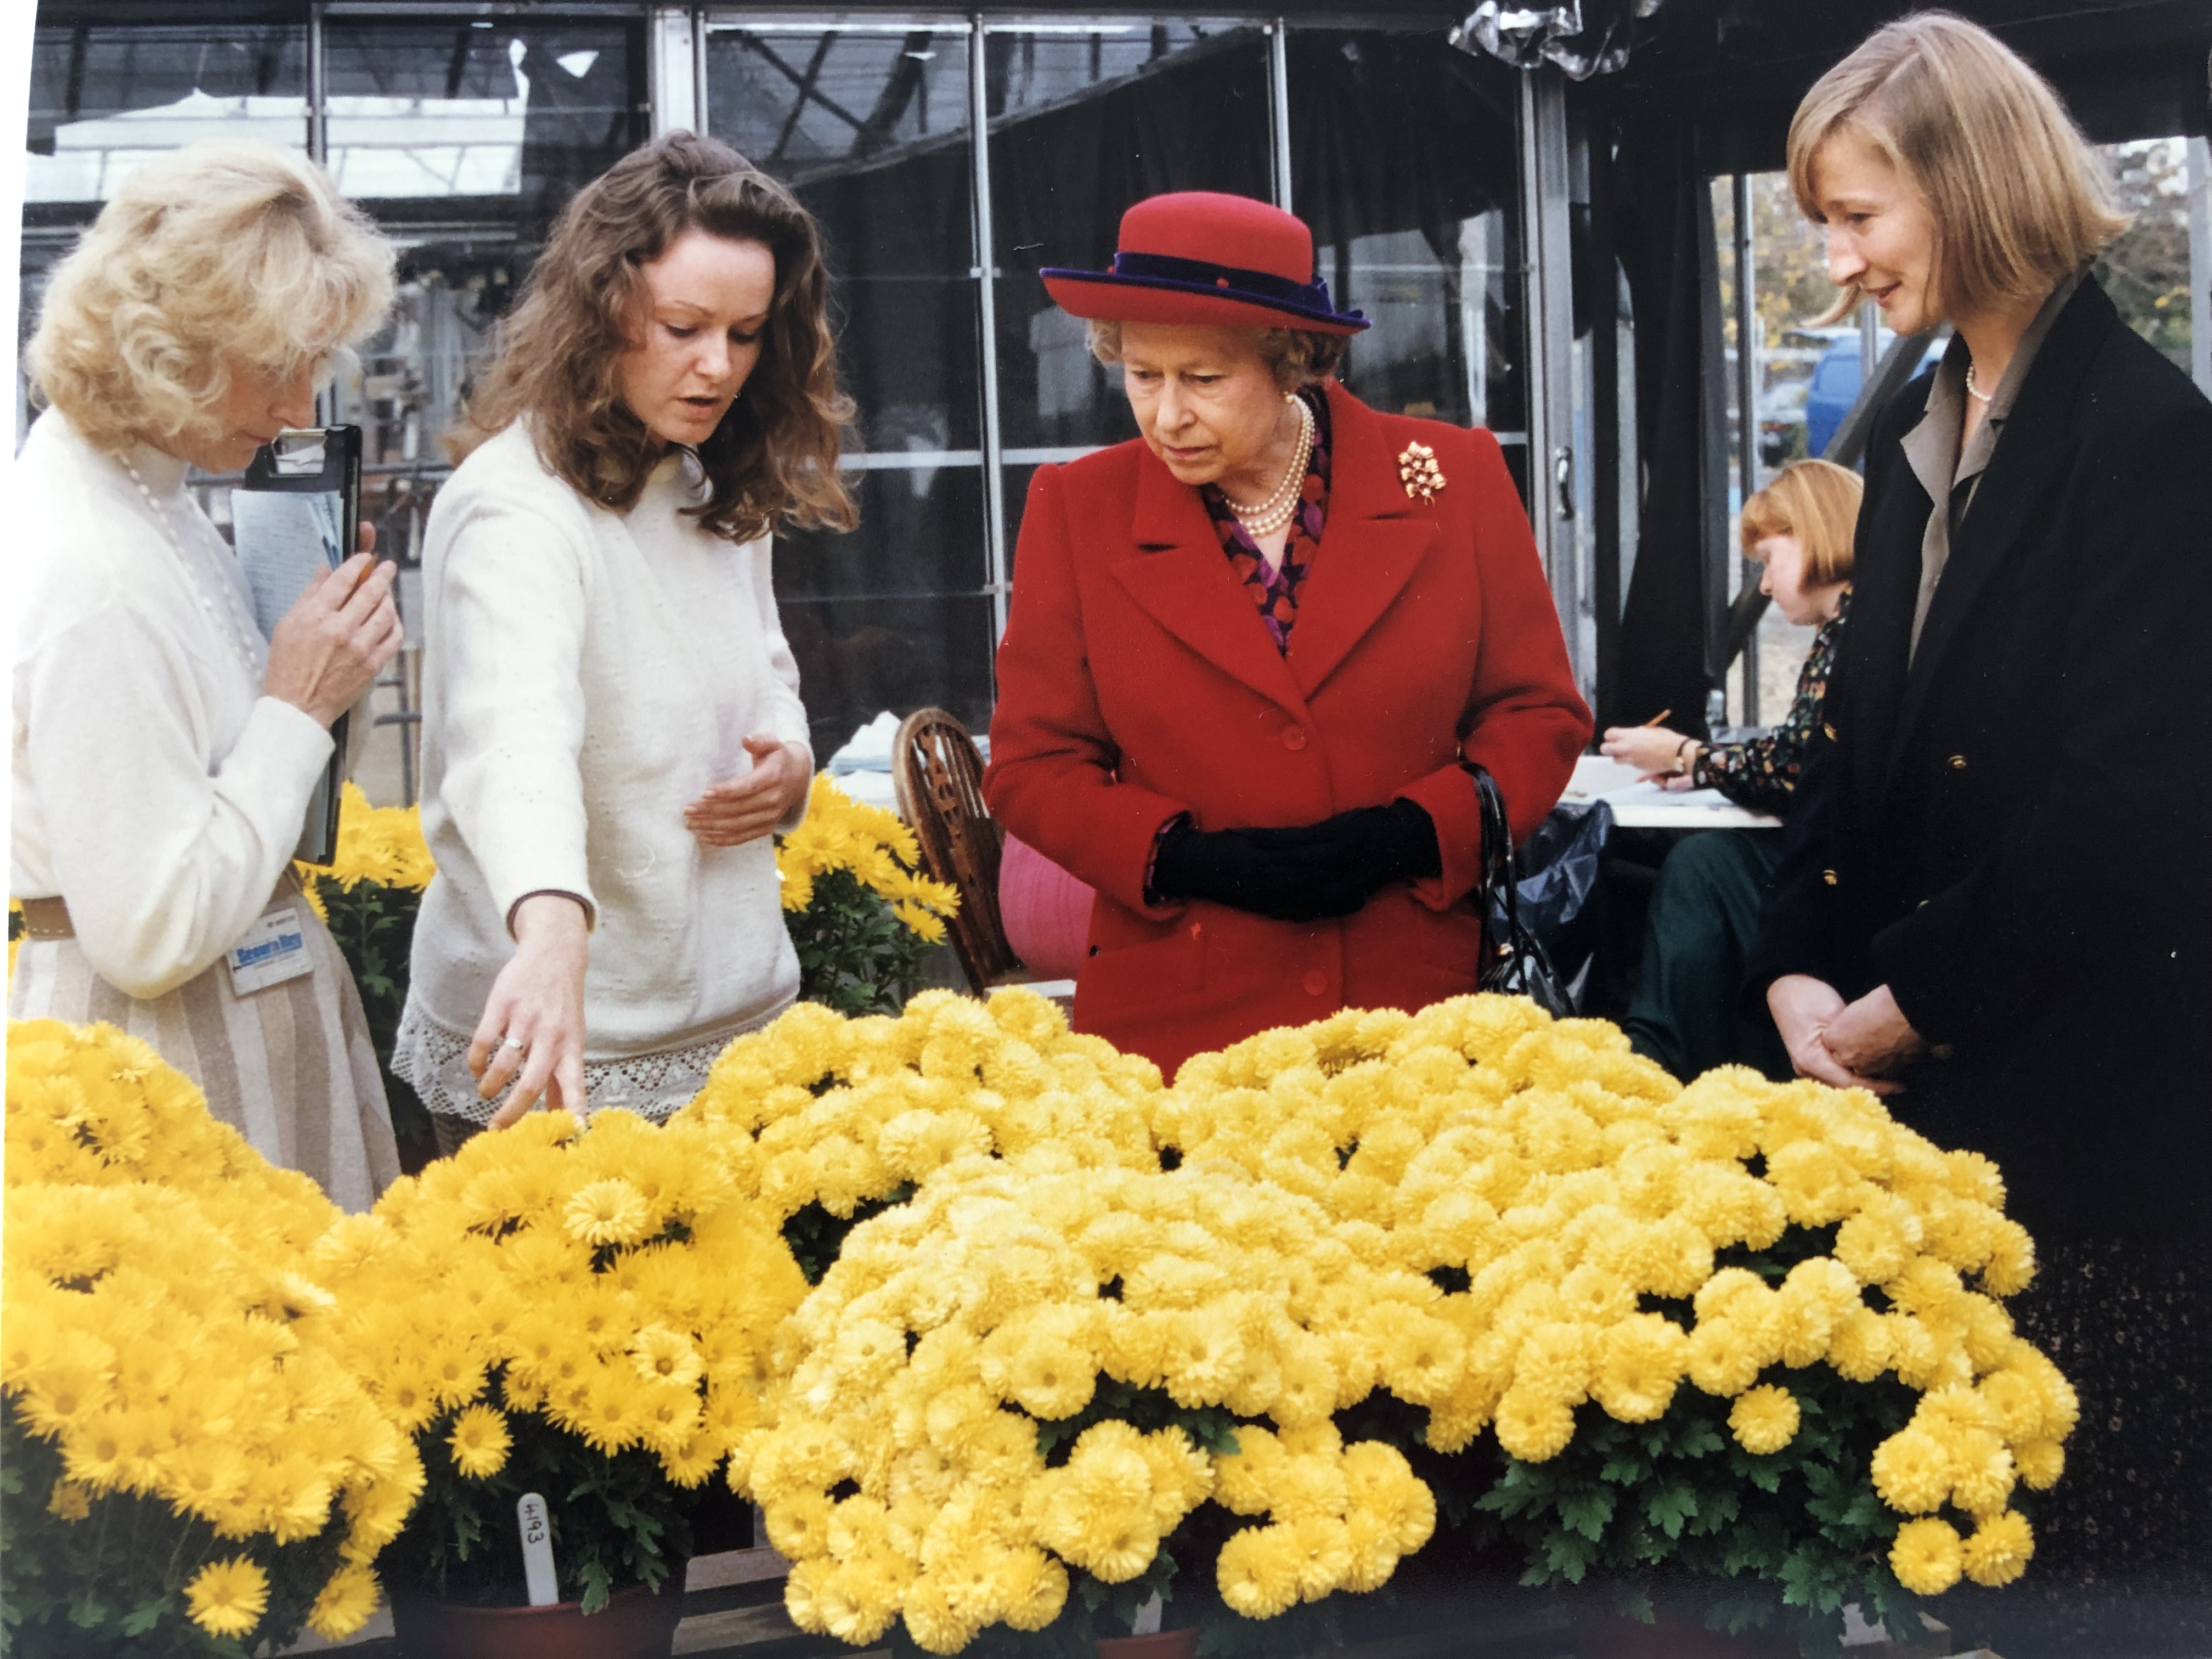 NIAB's Hilary Papworth shows The Queen our Chrysanthemum trial